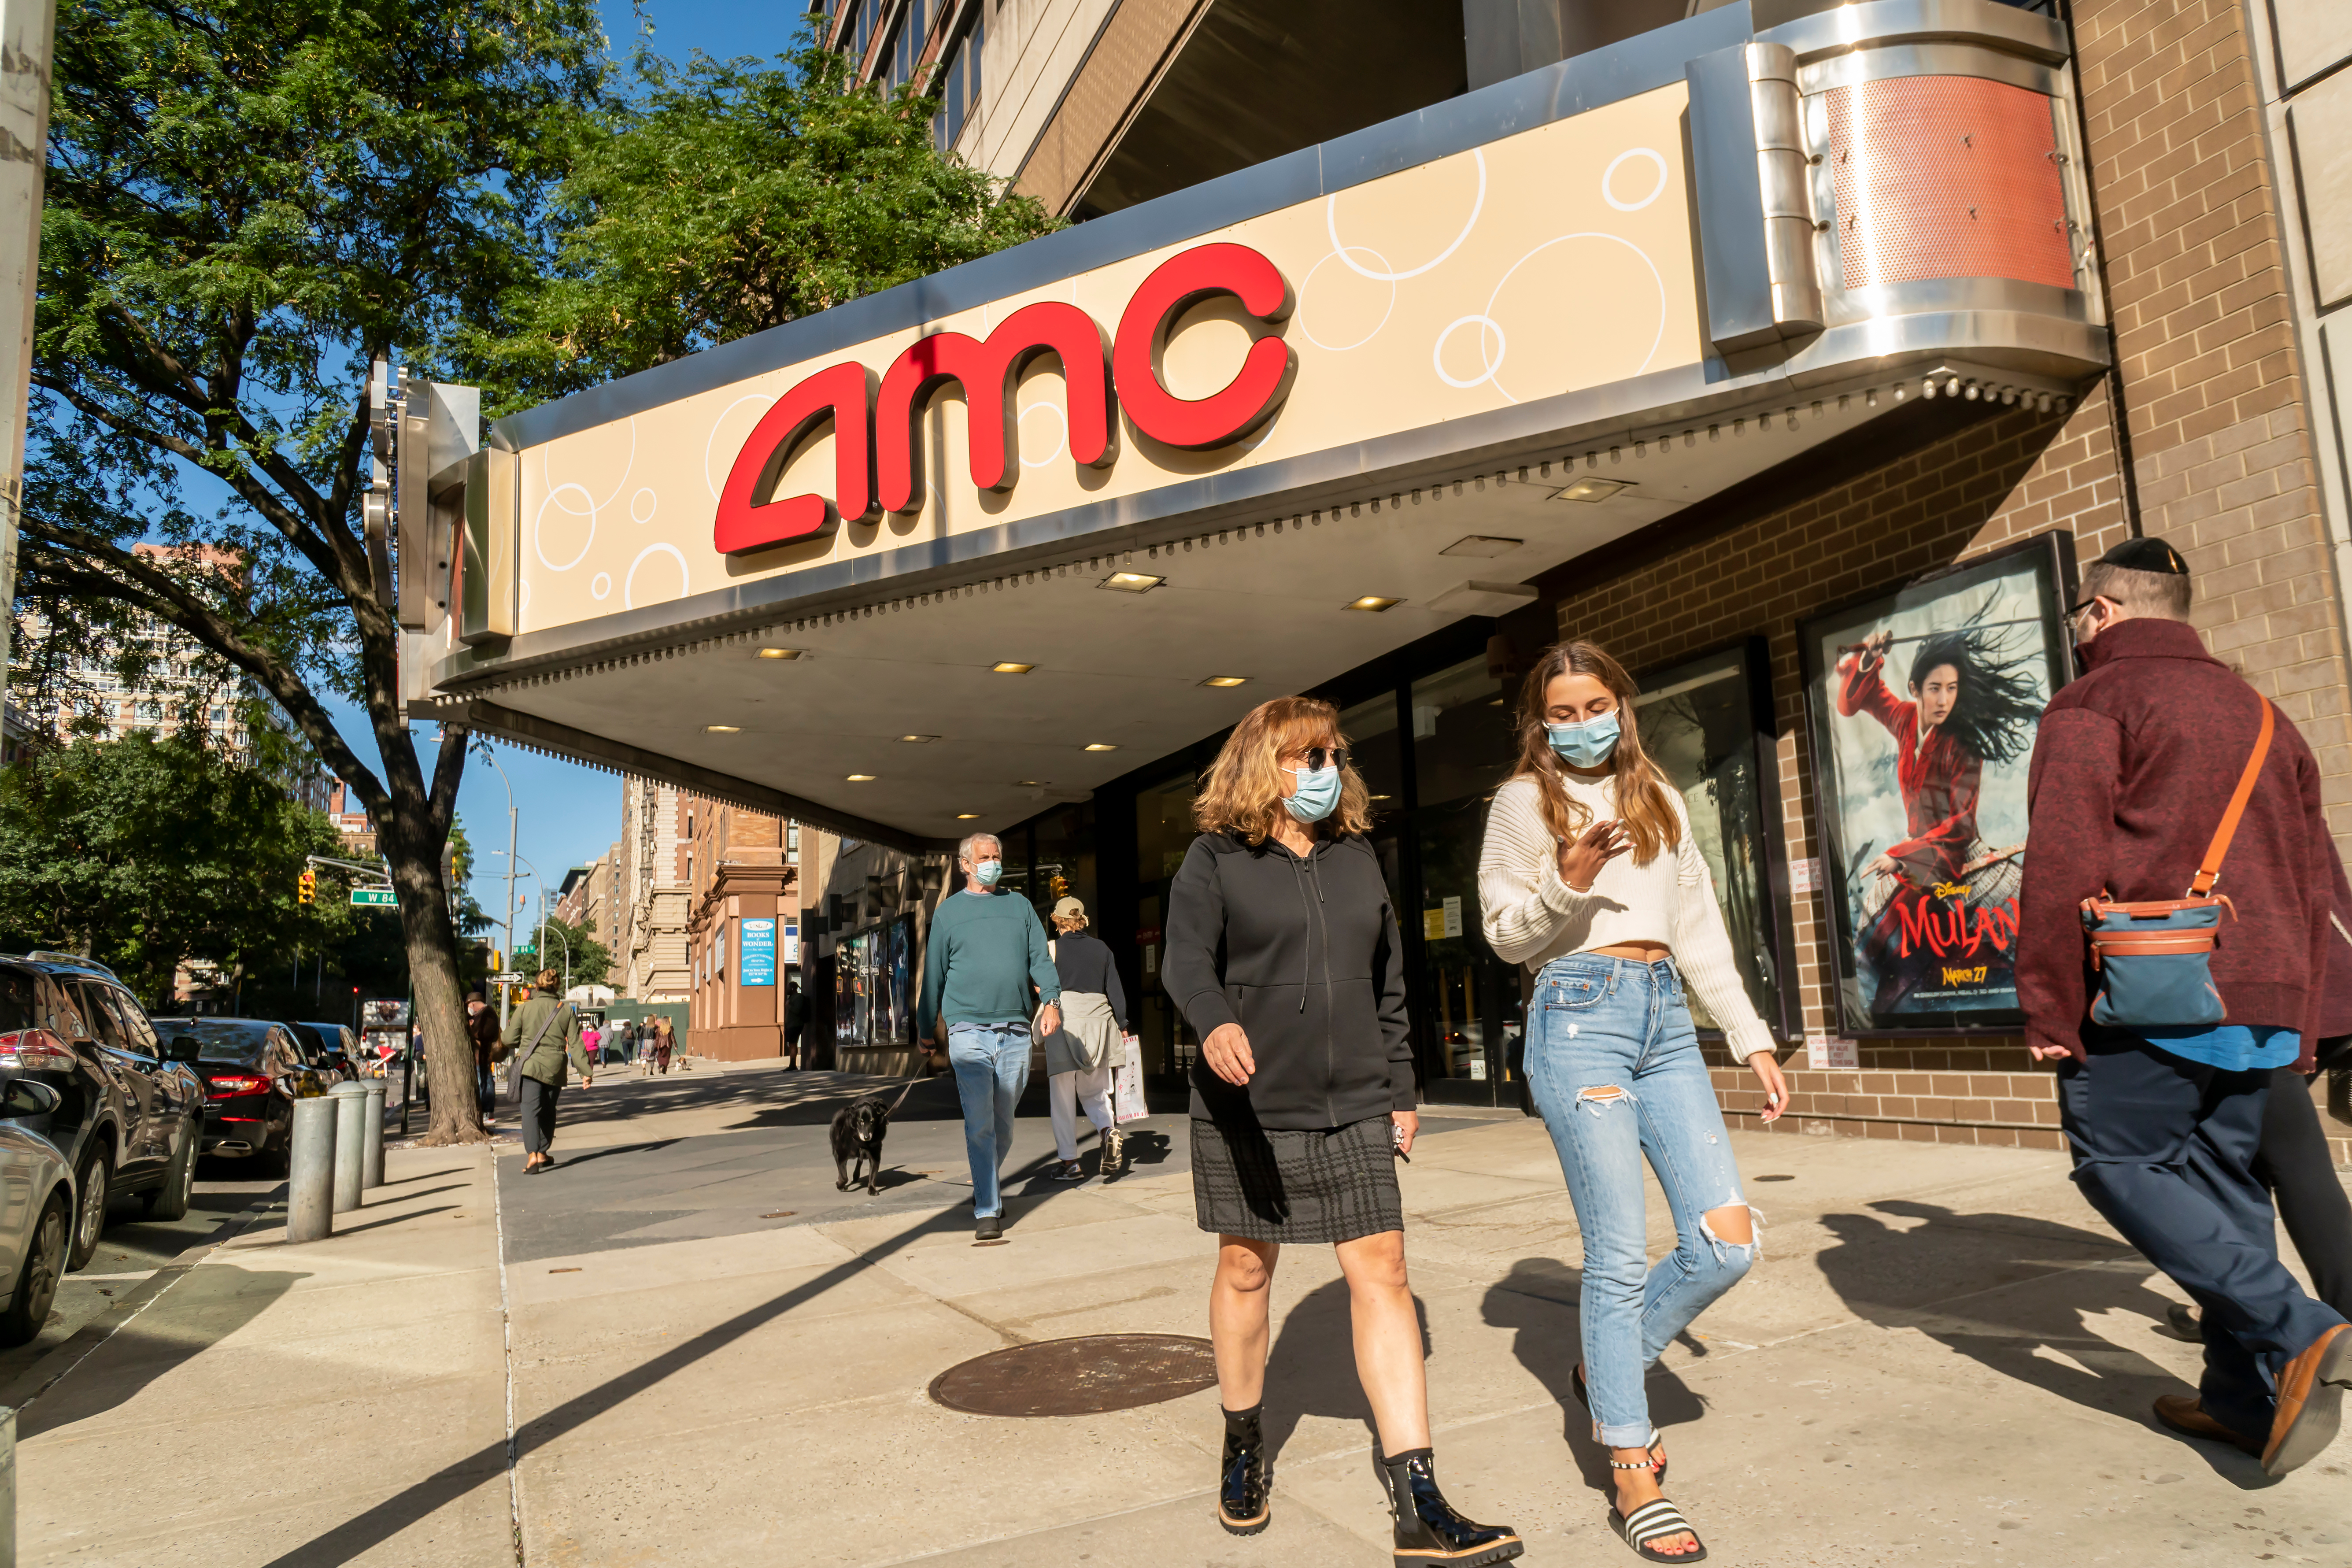 Cash, Content, and Campaign: How Market Research Helped AMC Theaters Rebound